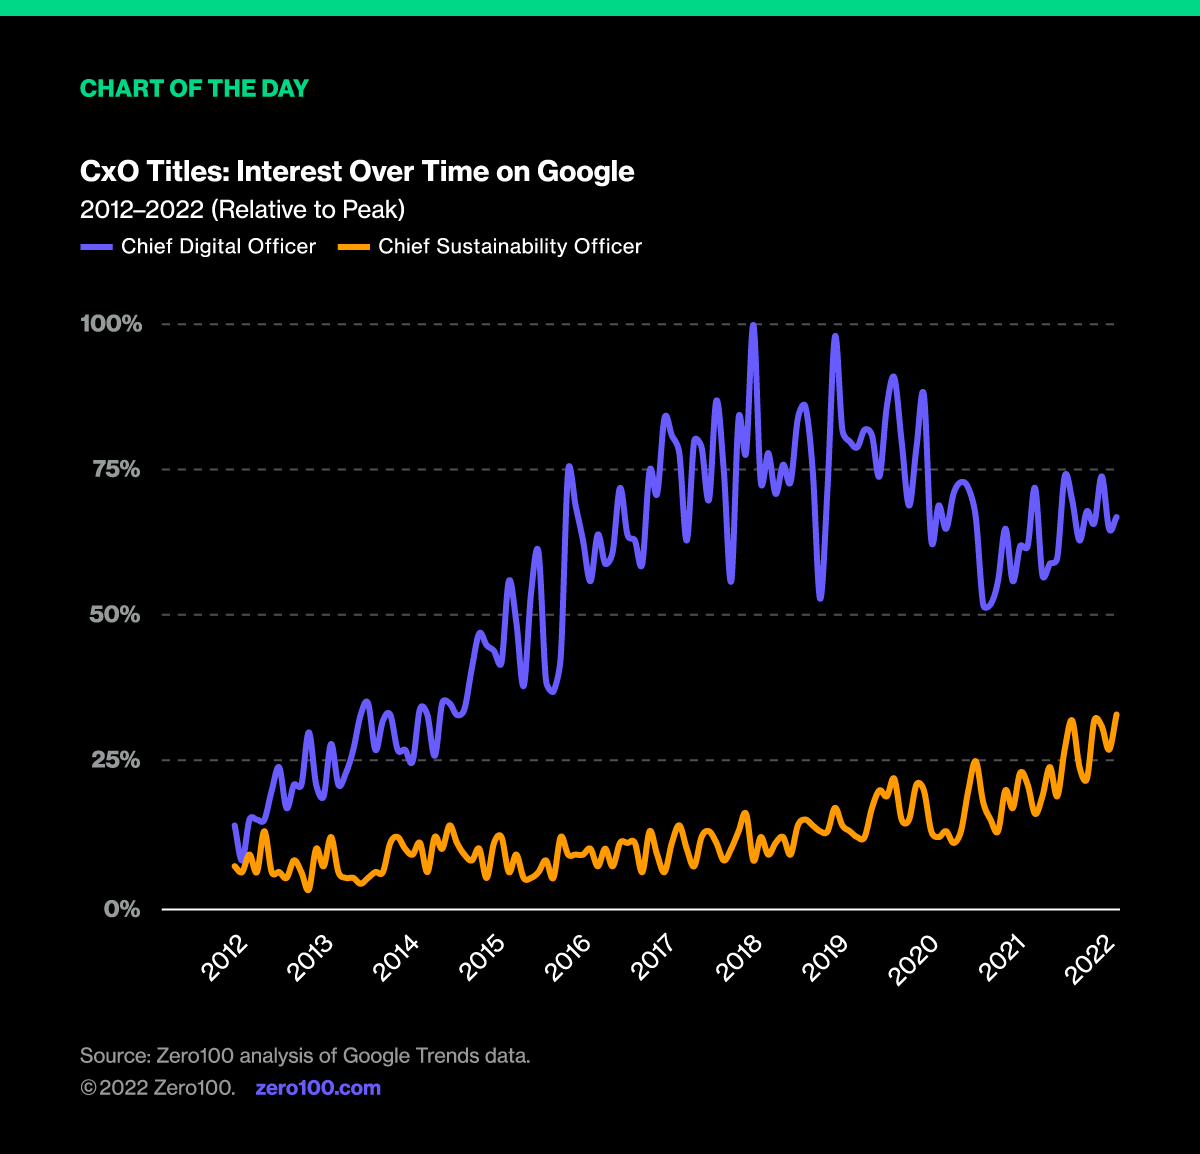 Graph depicting Chief Officer's  titles interest over time on Google. Source: Zero100 analysis of Google trends data.